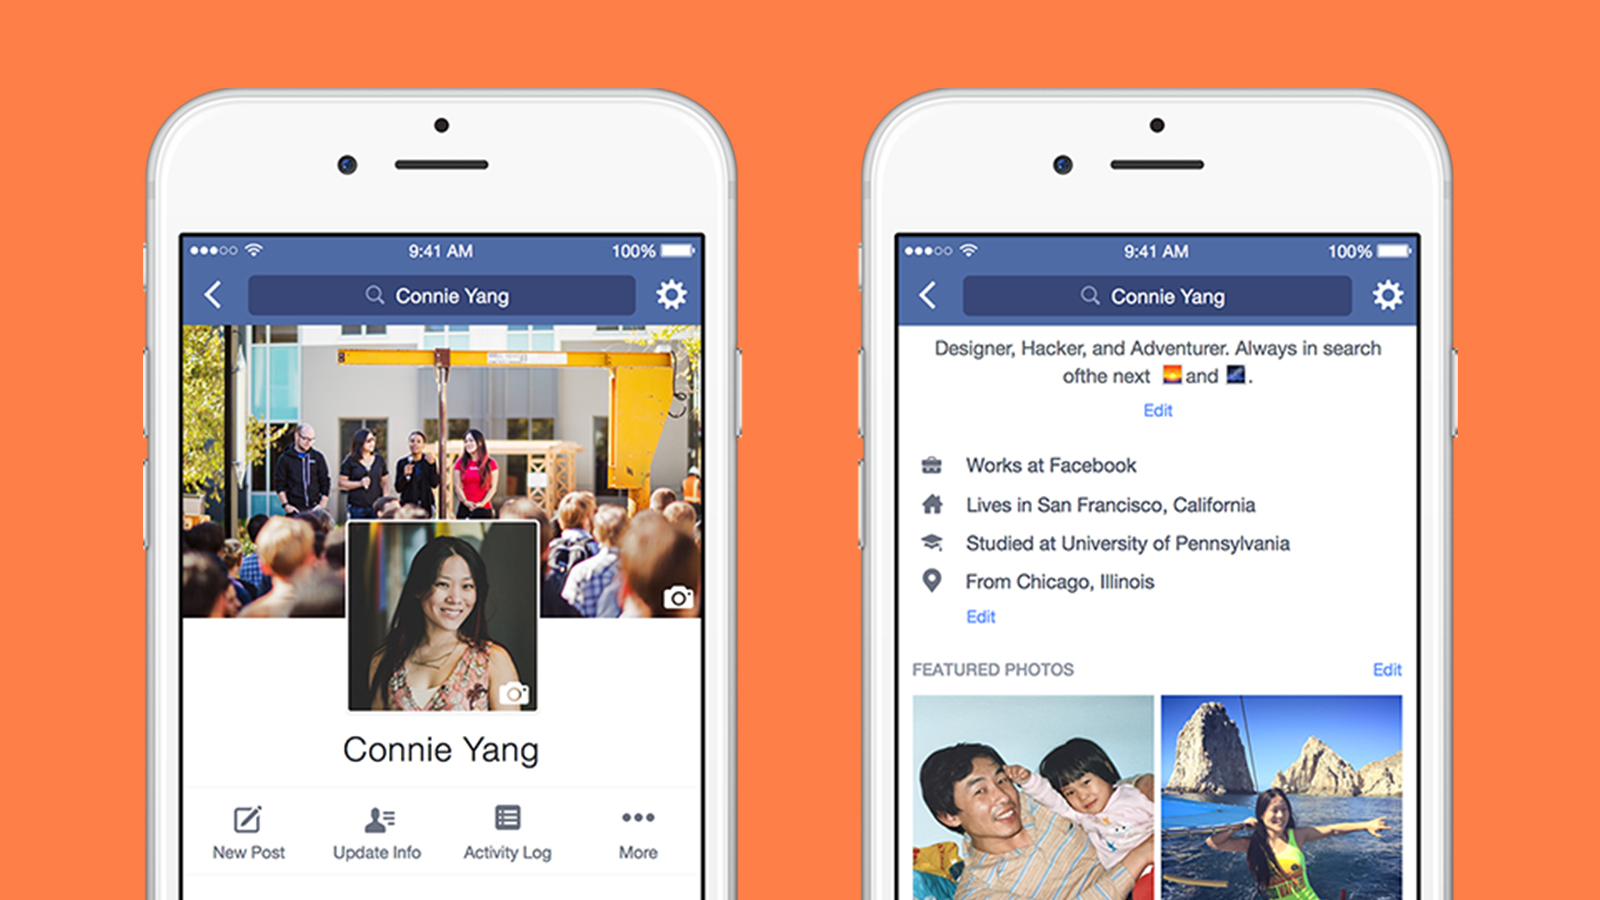 Facebook Updated Profiles - Add A Featured Photo On Facebook - HD Wallpaper 